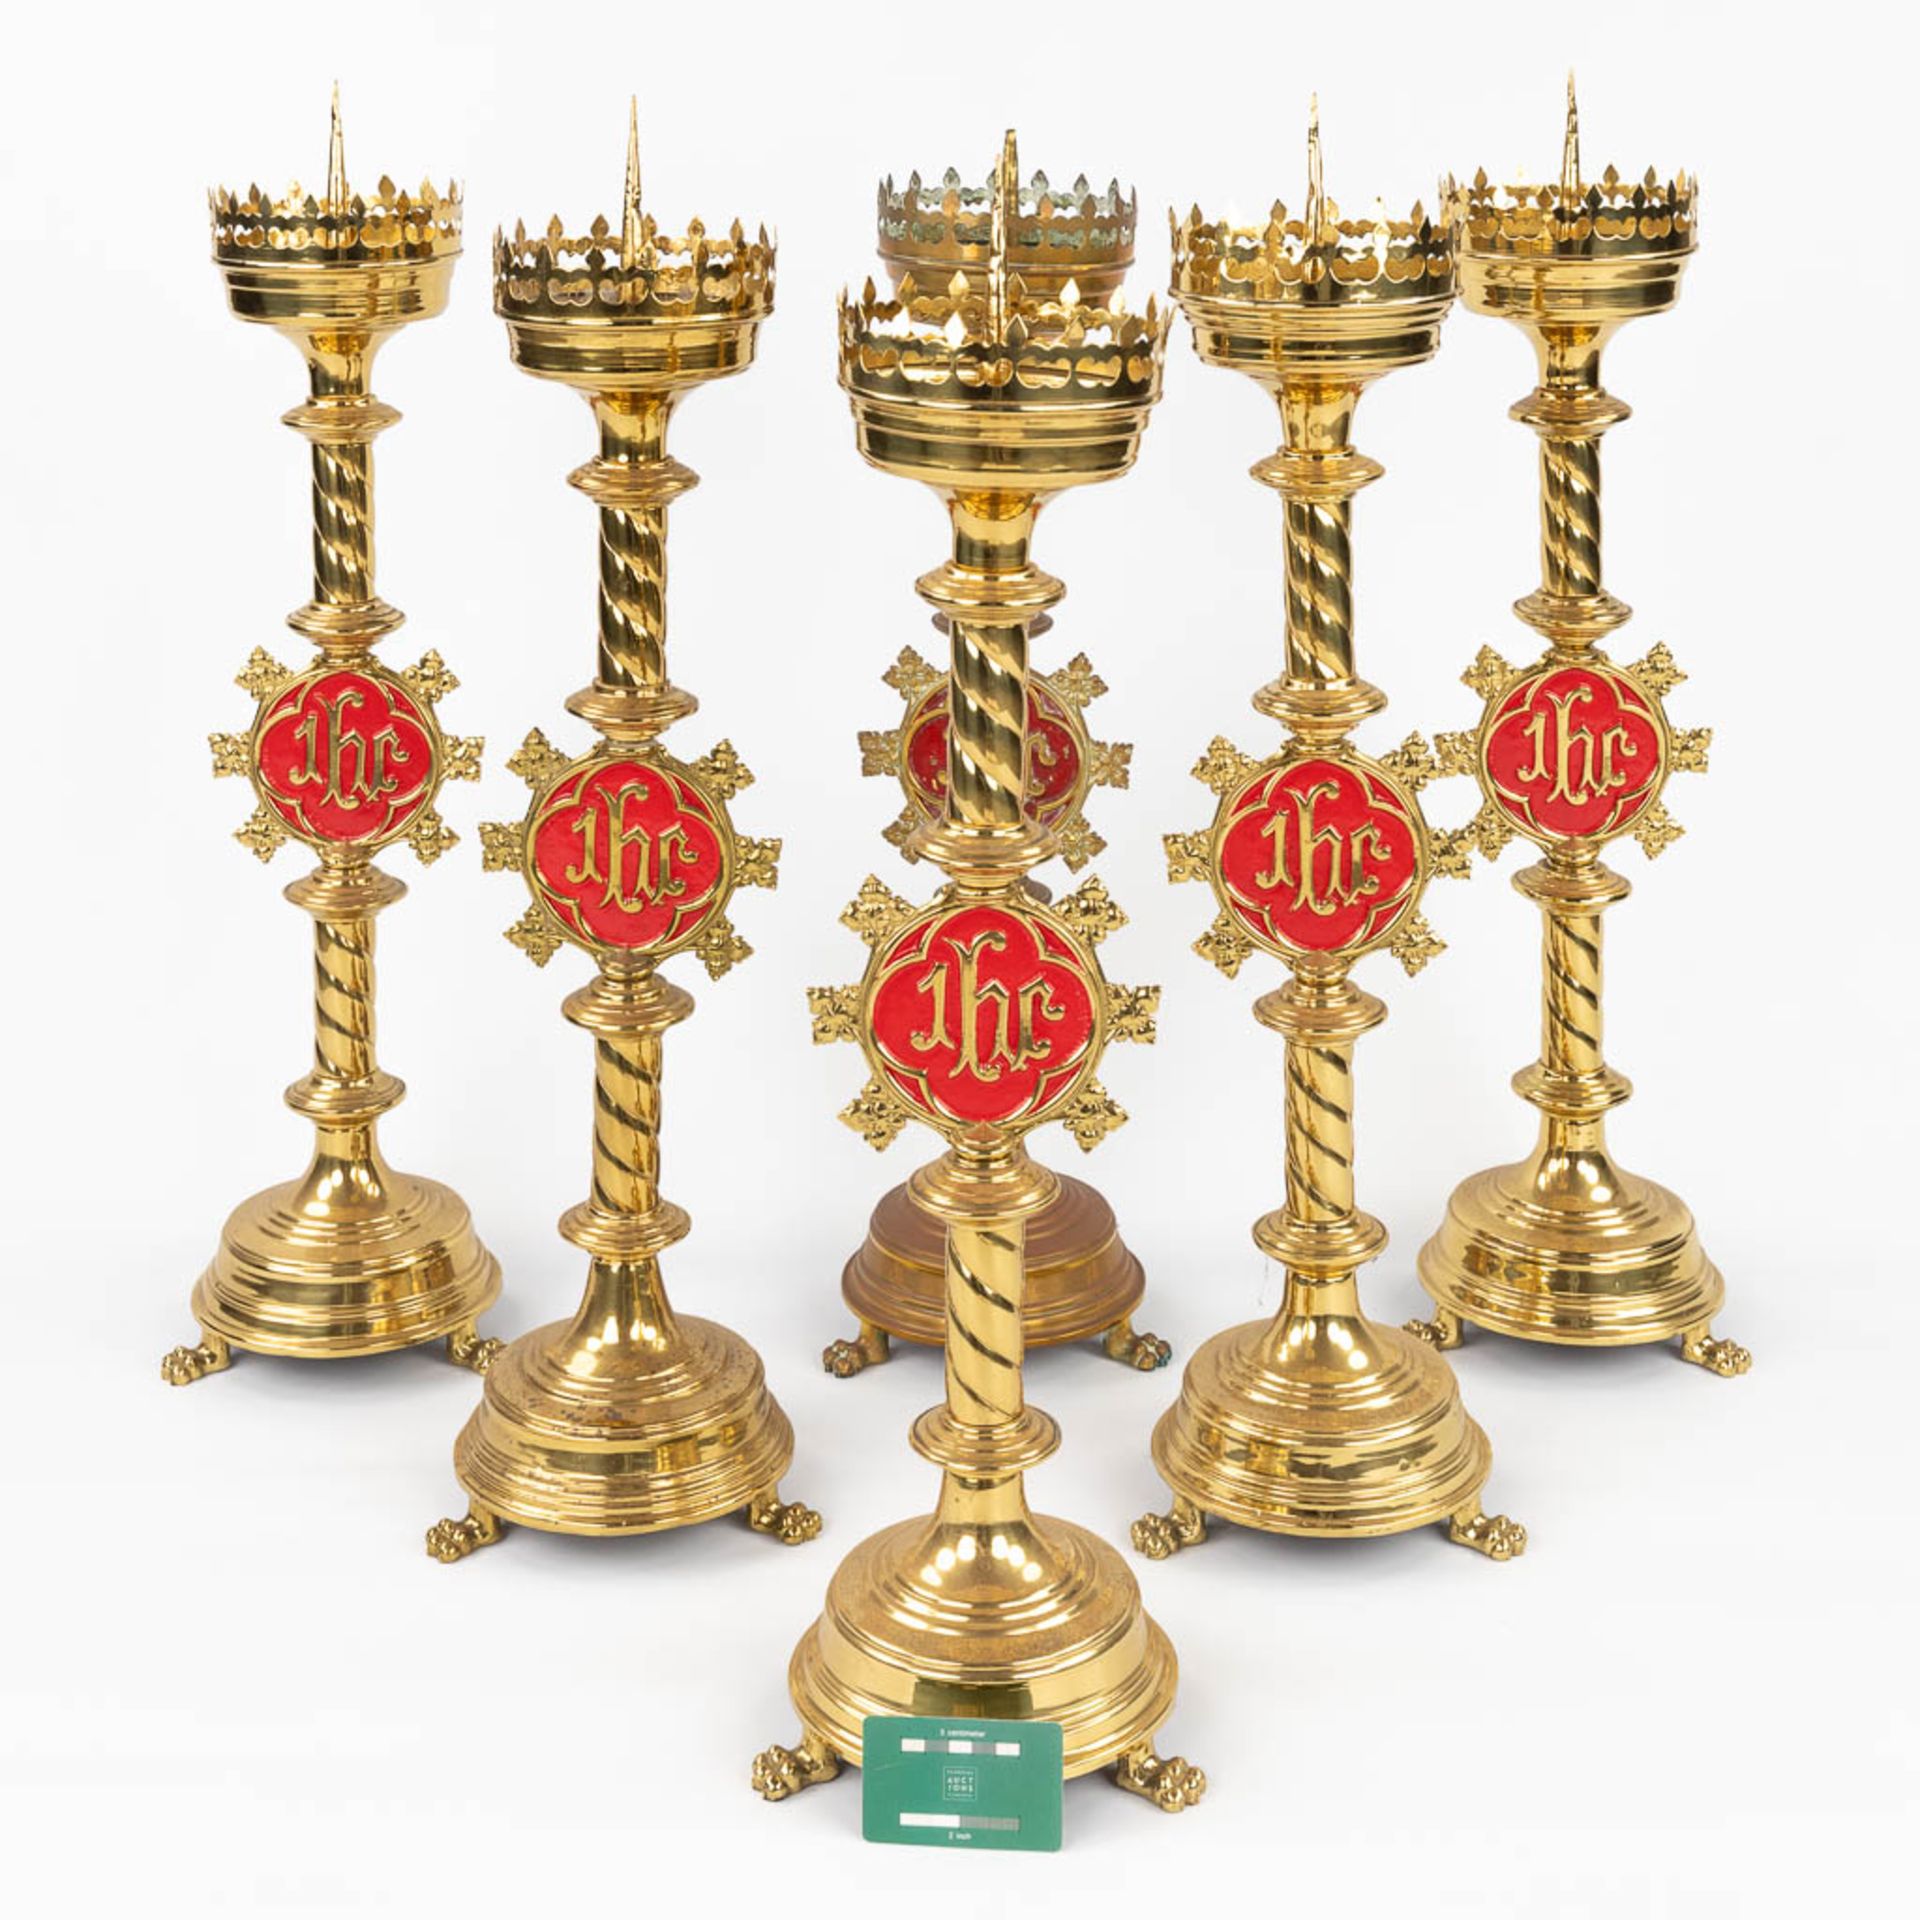 A set of 6 Church candlesticks with red IHS logo. (H:72 x D:20 cm) - Image 2 of 13